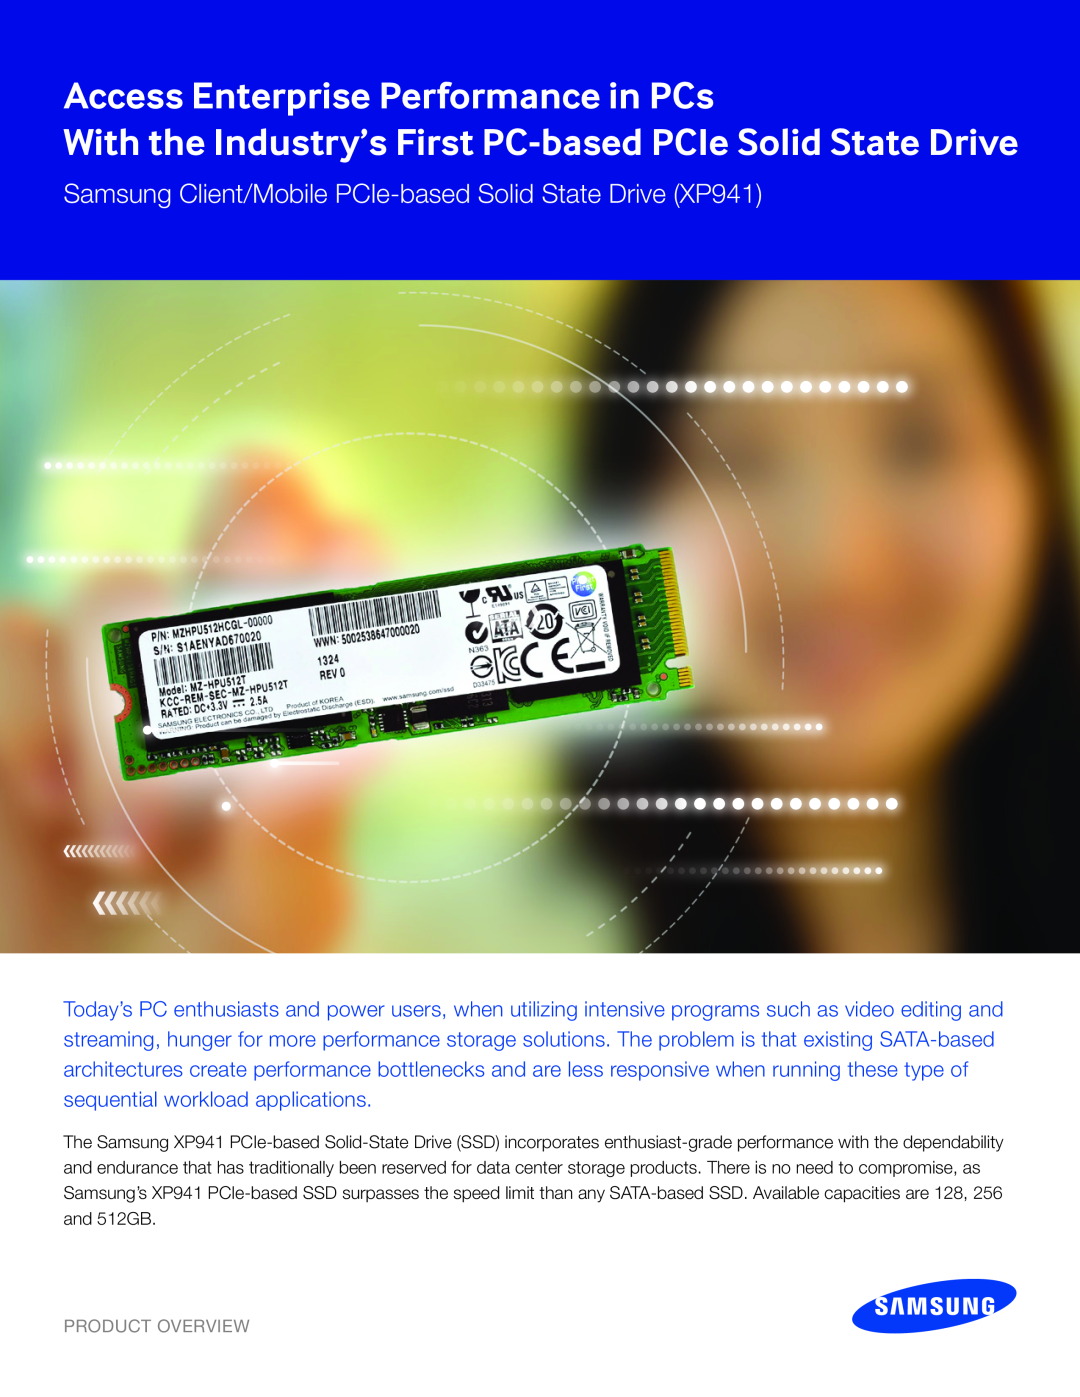 Samsung xp941 manual Access Enterprise Performance in PCs, With the Industry’s First PC-based PCIe Solid State Drive 